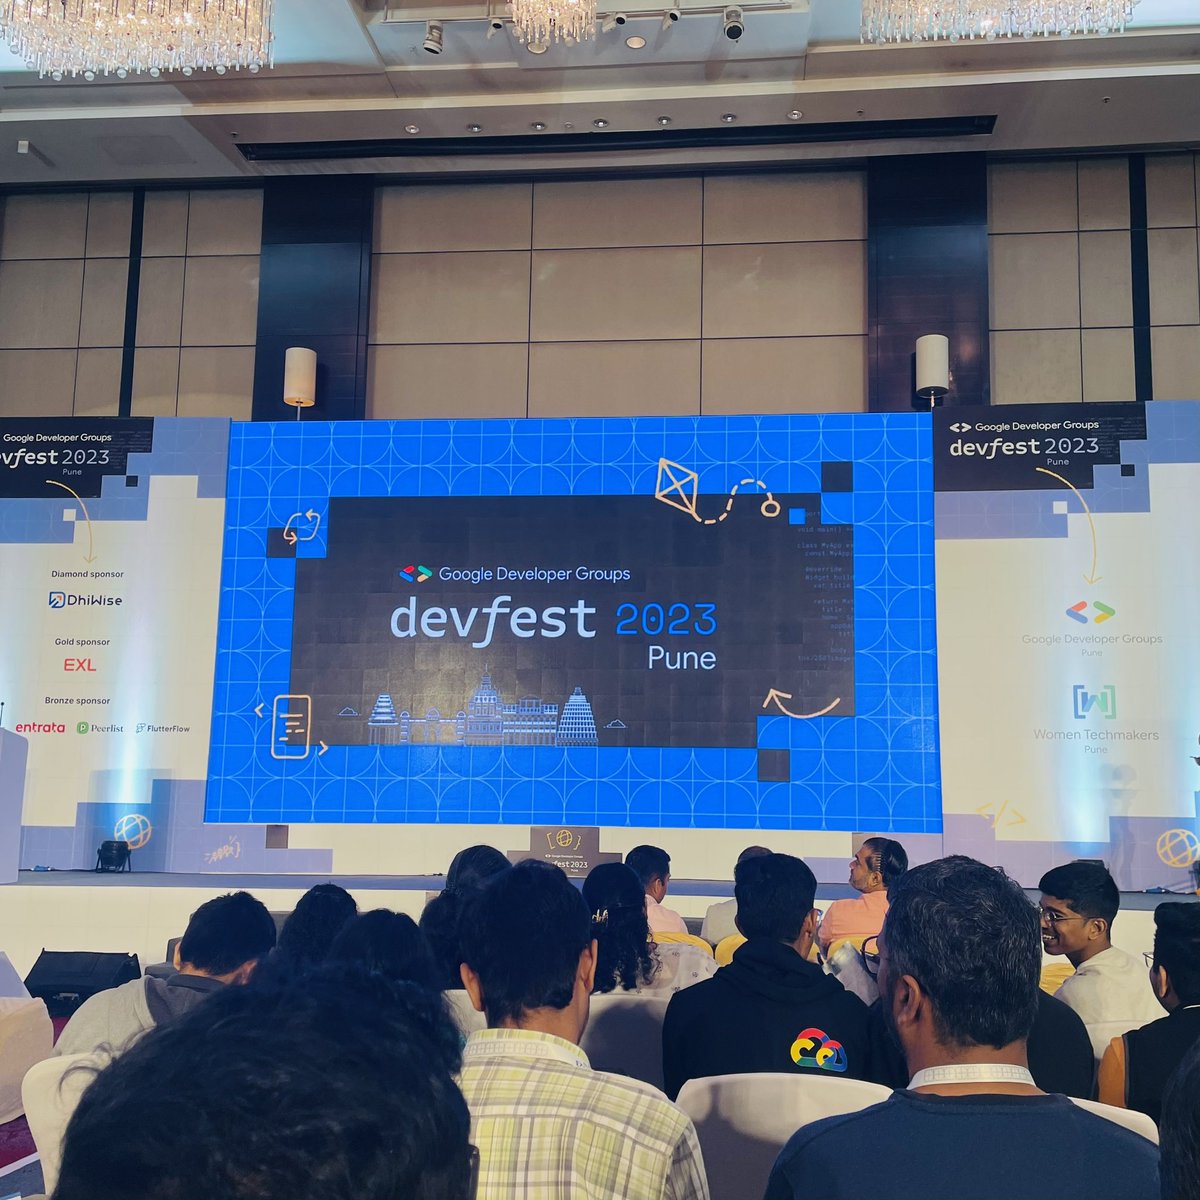 'Thrilled to be at #dfpune, soaking in the energy at the introductory session! Ready for a day full of learning and networking ahead. Let's dive into the latest trends and innovations! 🚀
#dfpune2023